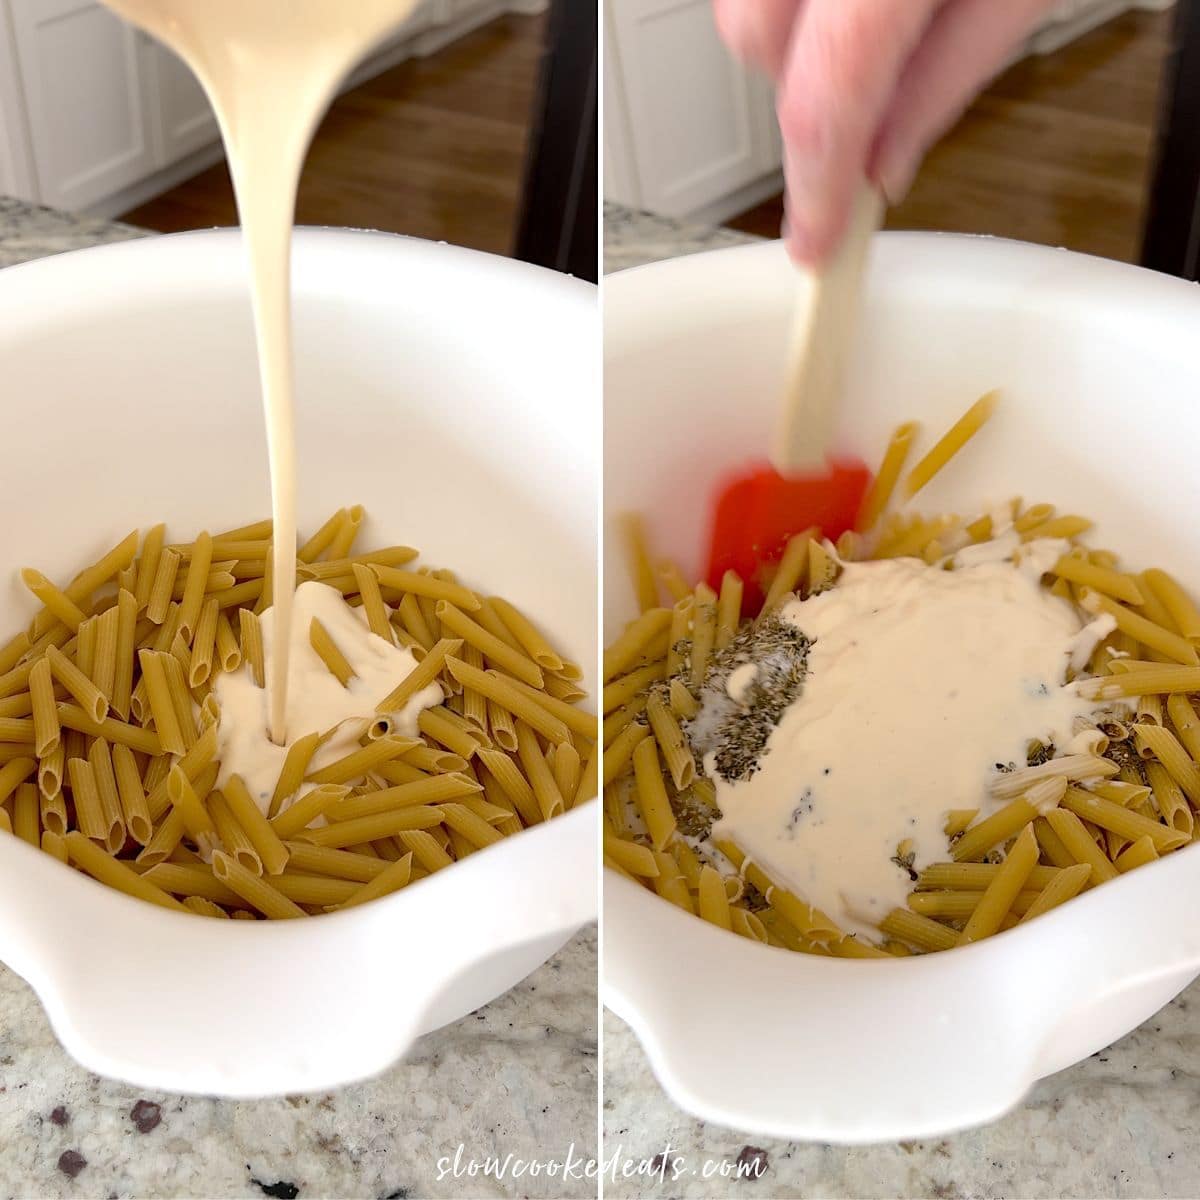 Mixing alfredo sauce and dry pasta with seasoning in a white bowl.